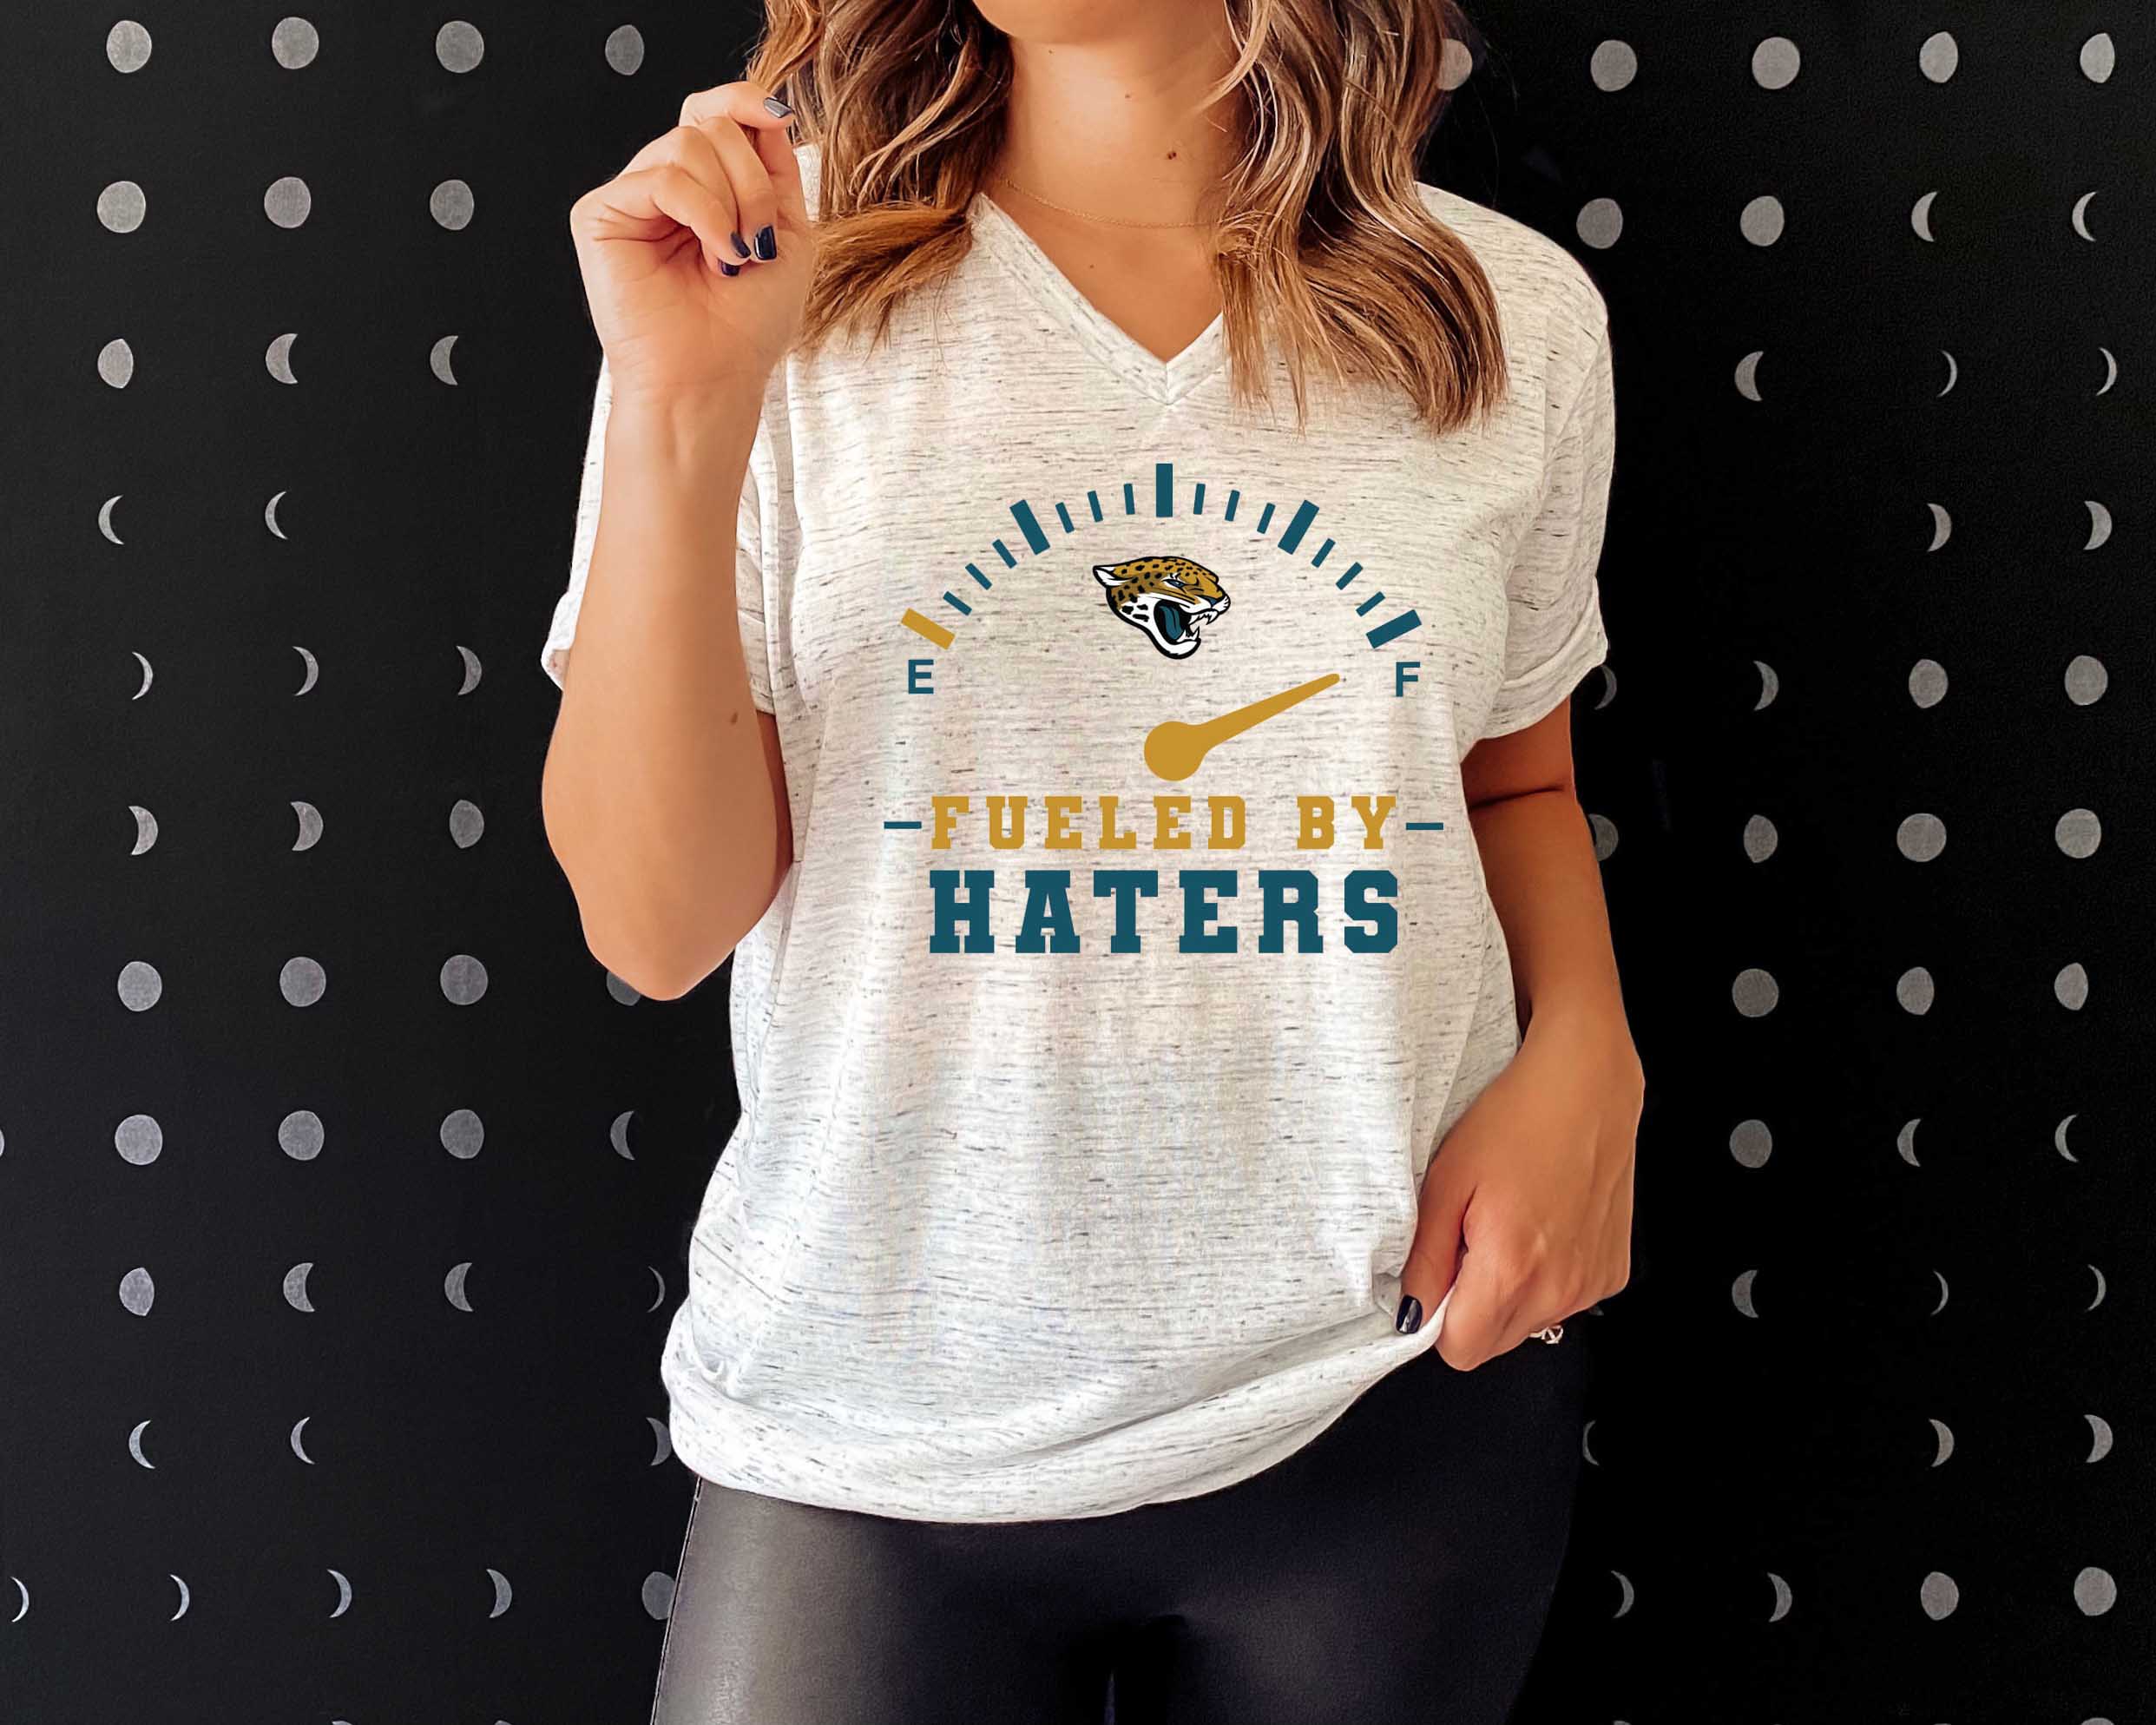 Marbled Grey Jaguars Fueled by Haters Shirt